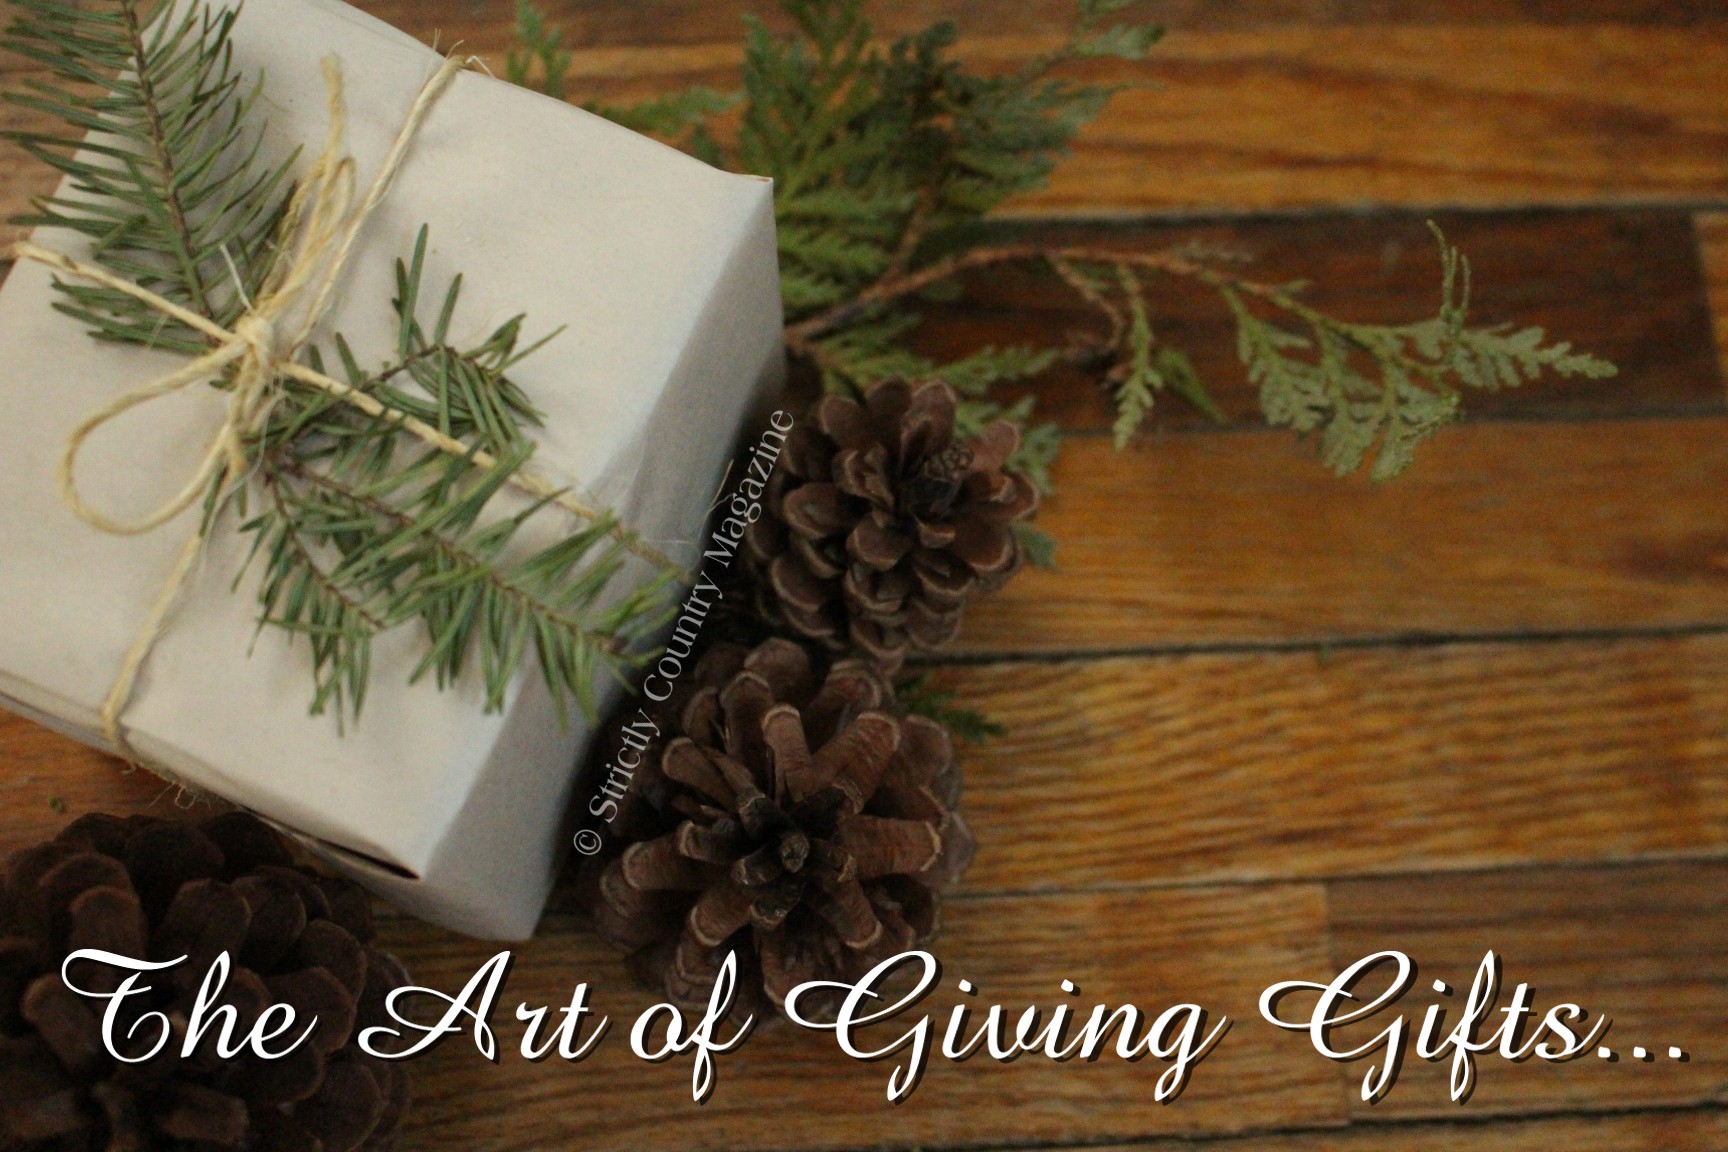 Strictly Country Magazine copyright Art of Giving Gifts